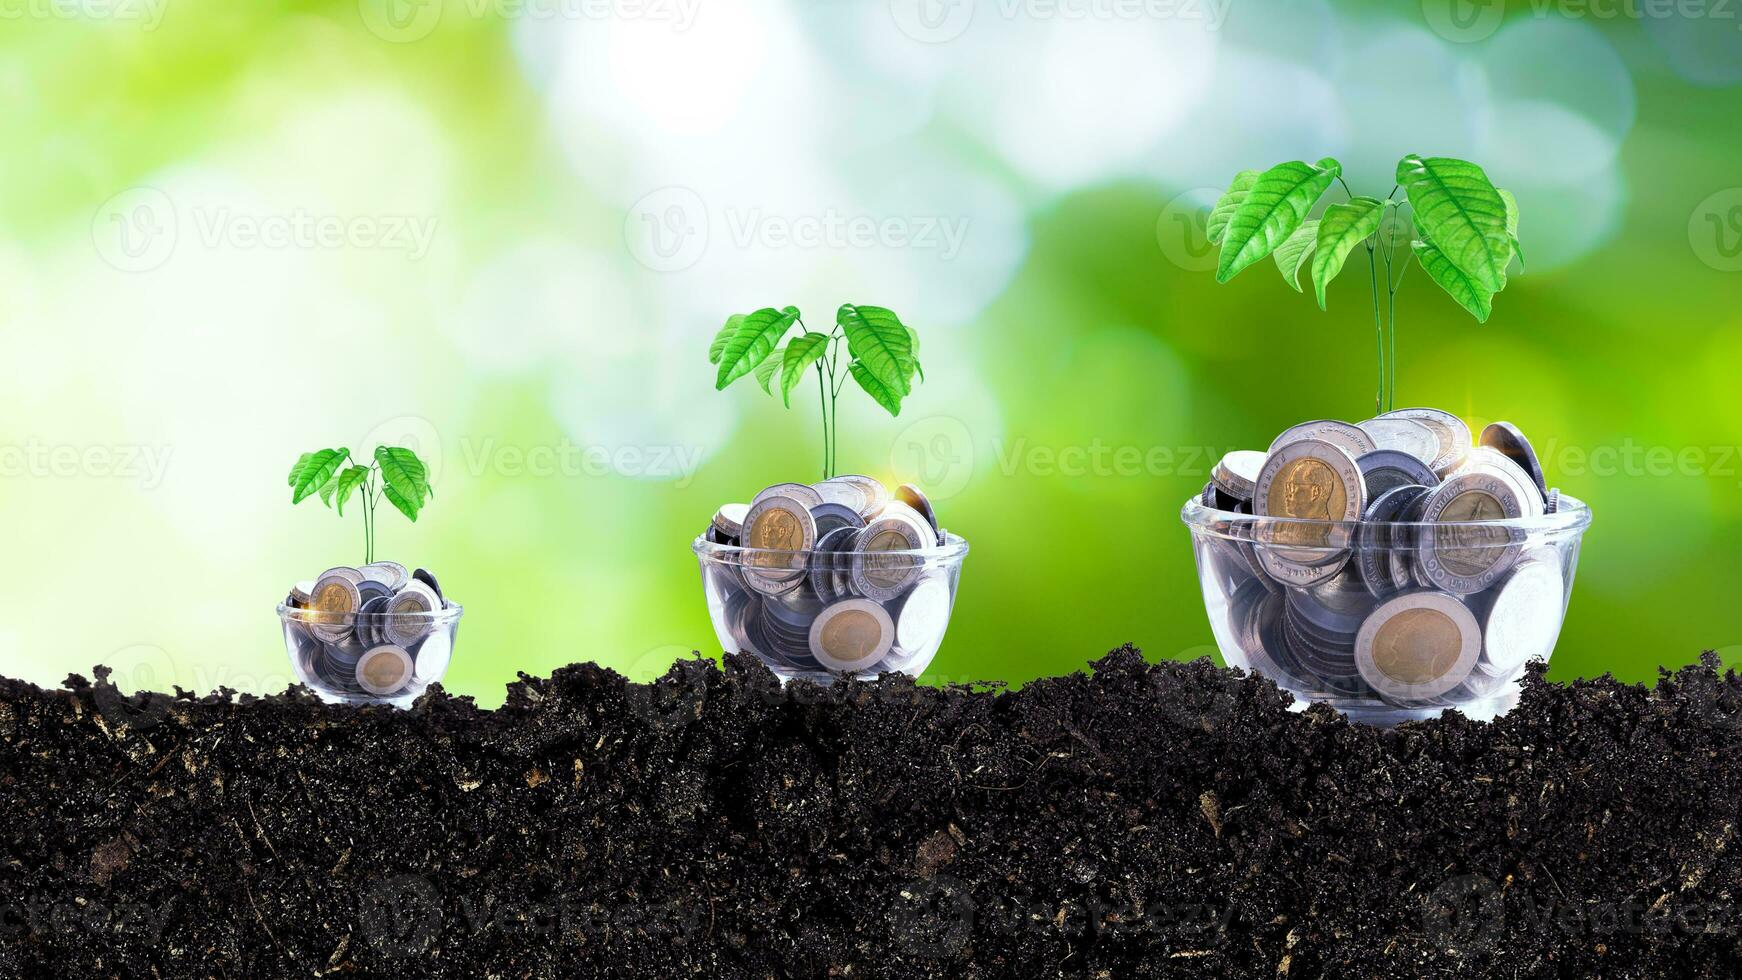 Coins in glass jar with plant on top putting on soil with sunlight bokeh green background. Financial investment ideas for future growth profits, trees growing on coins photo